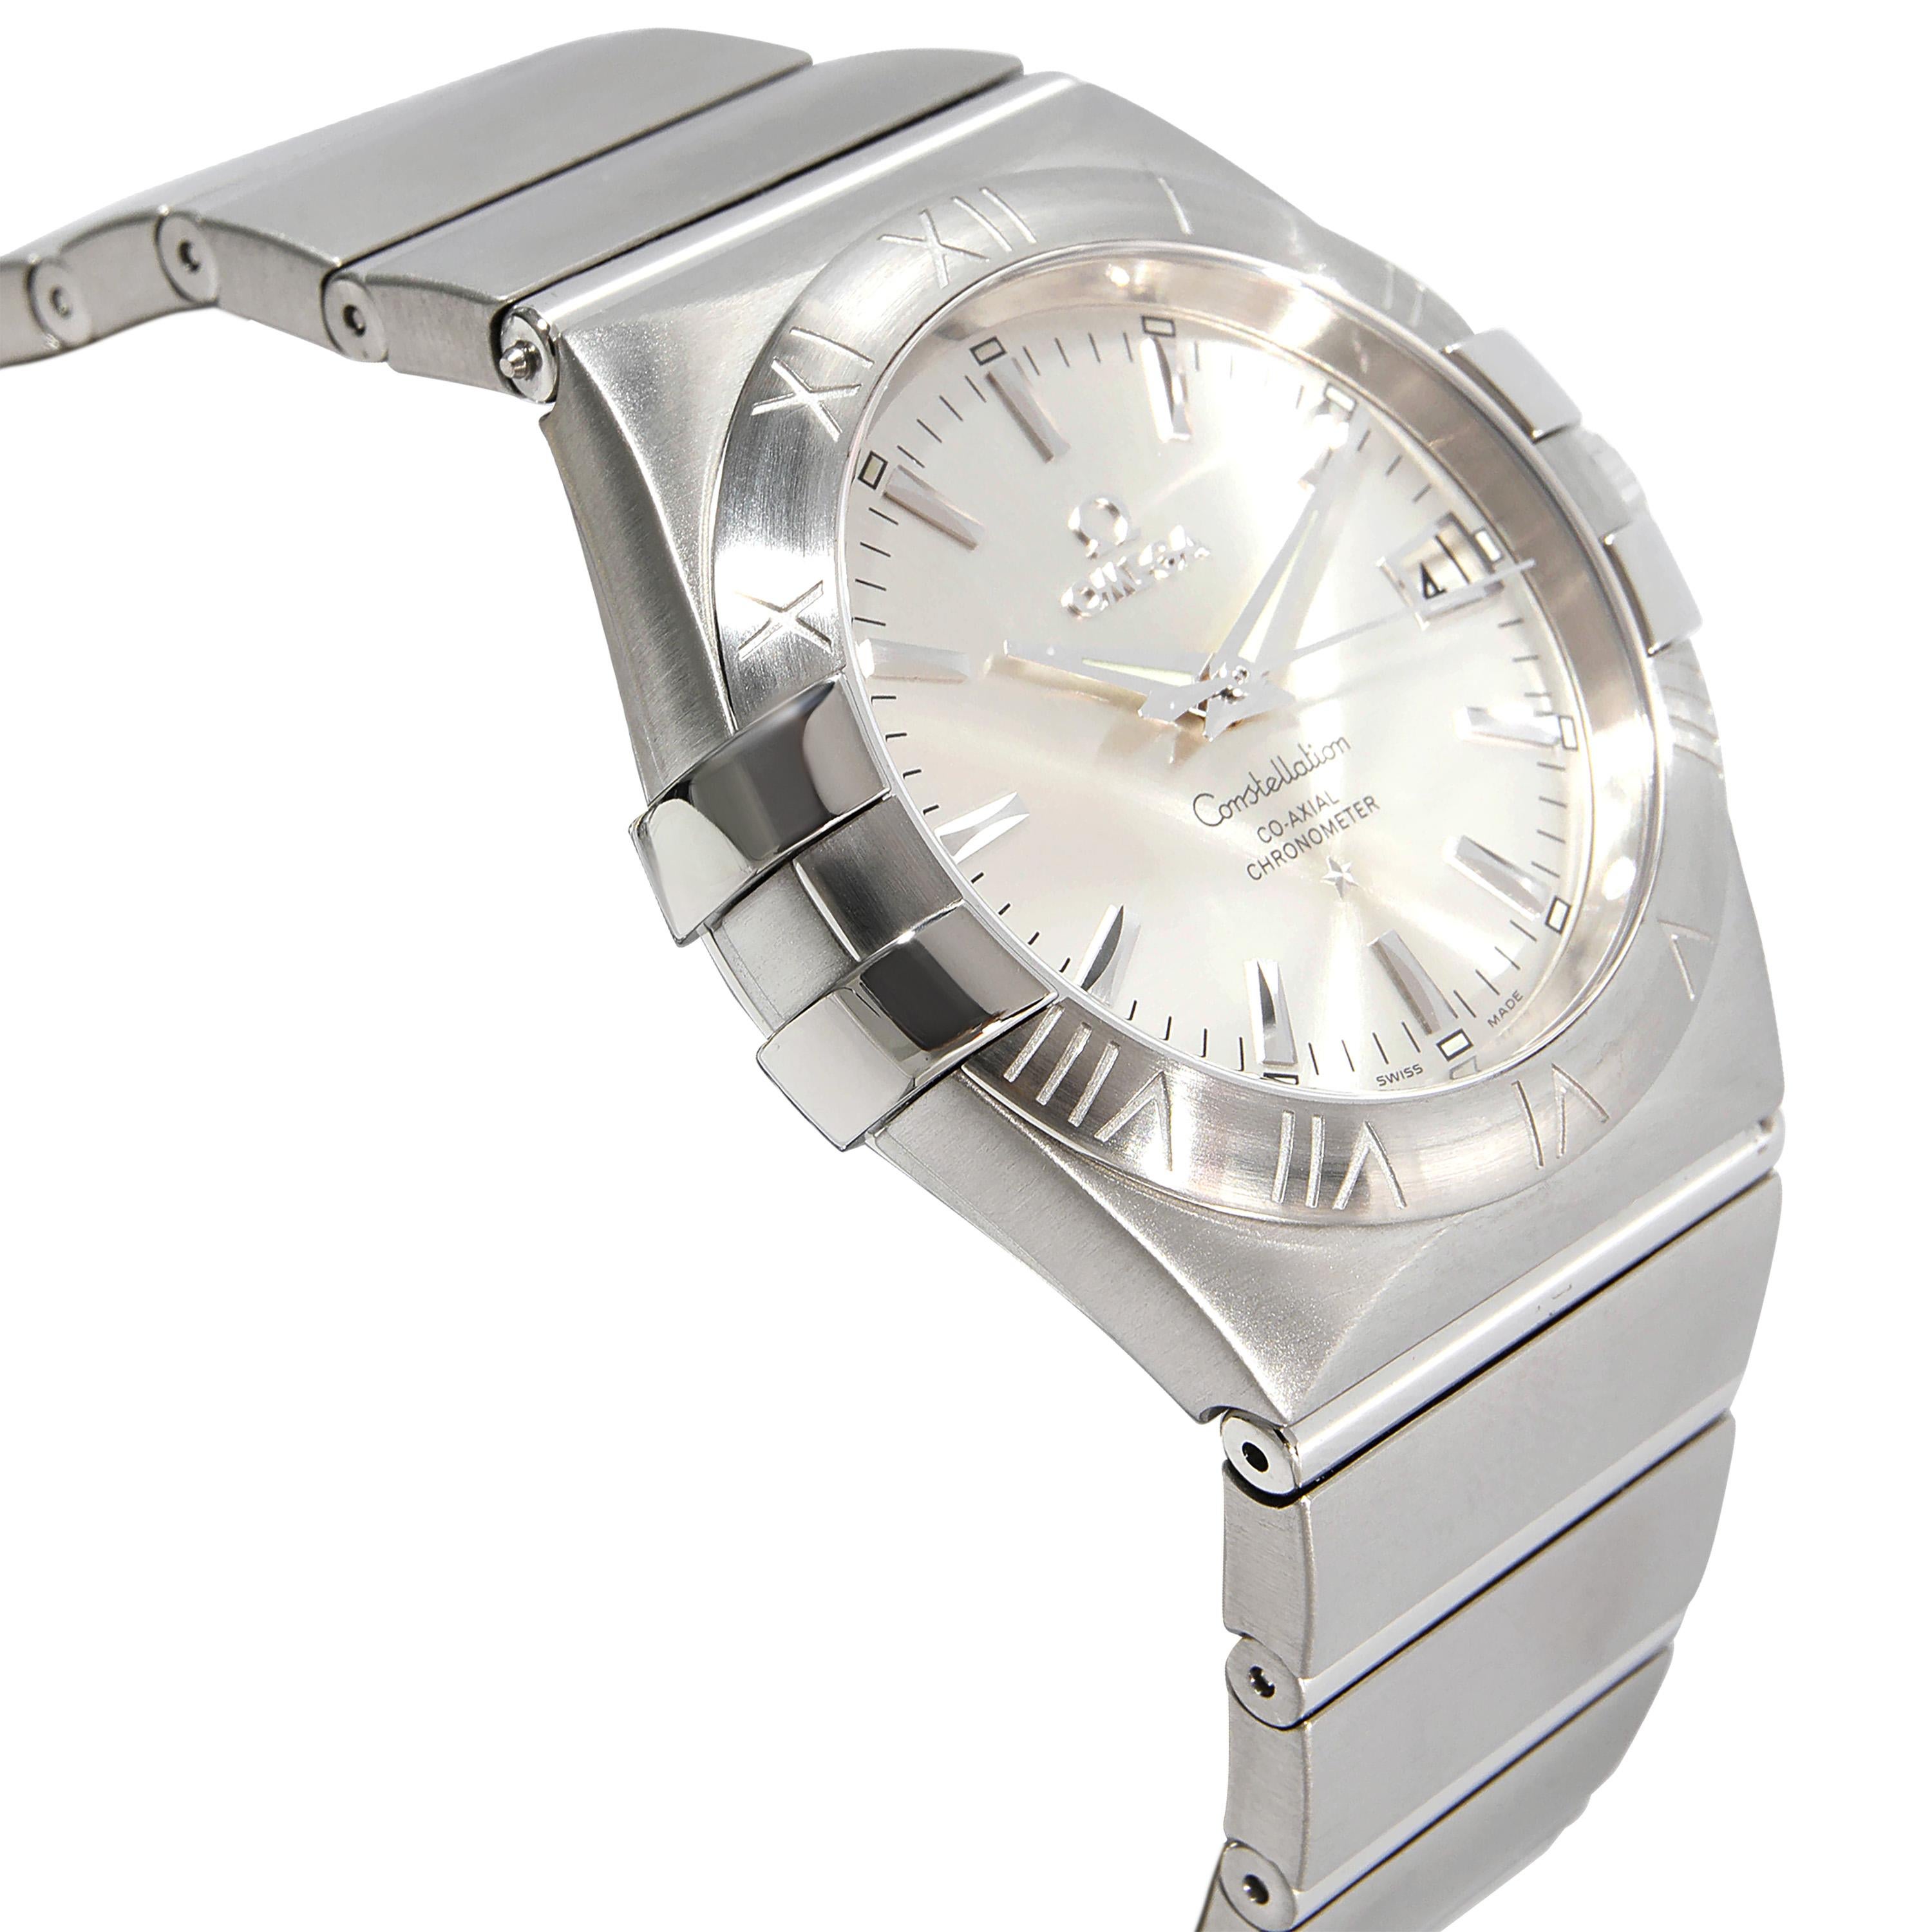 Omega Constellation 123.10.35.20.02.001 Unisex Watch in  Stainless Steel In Excellent Condition For Sale In New York, NY